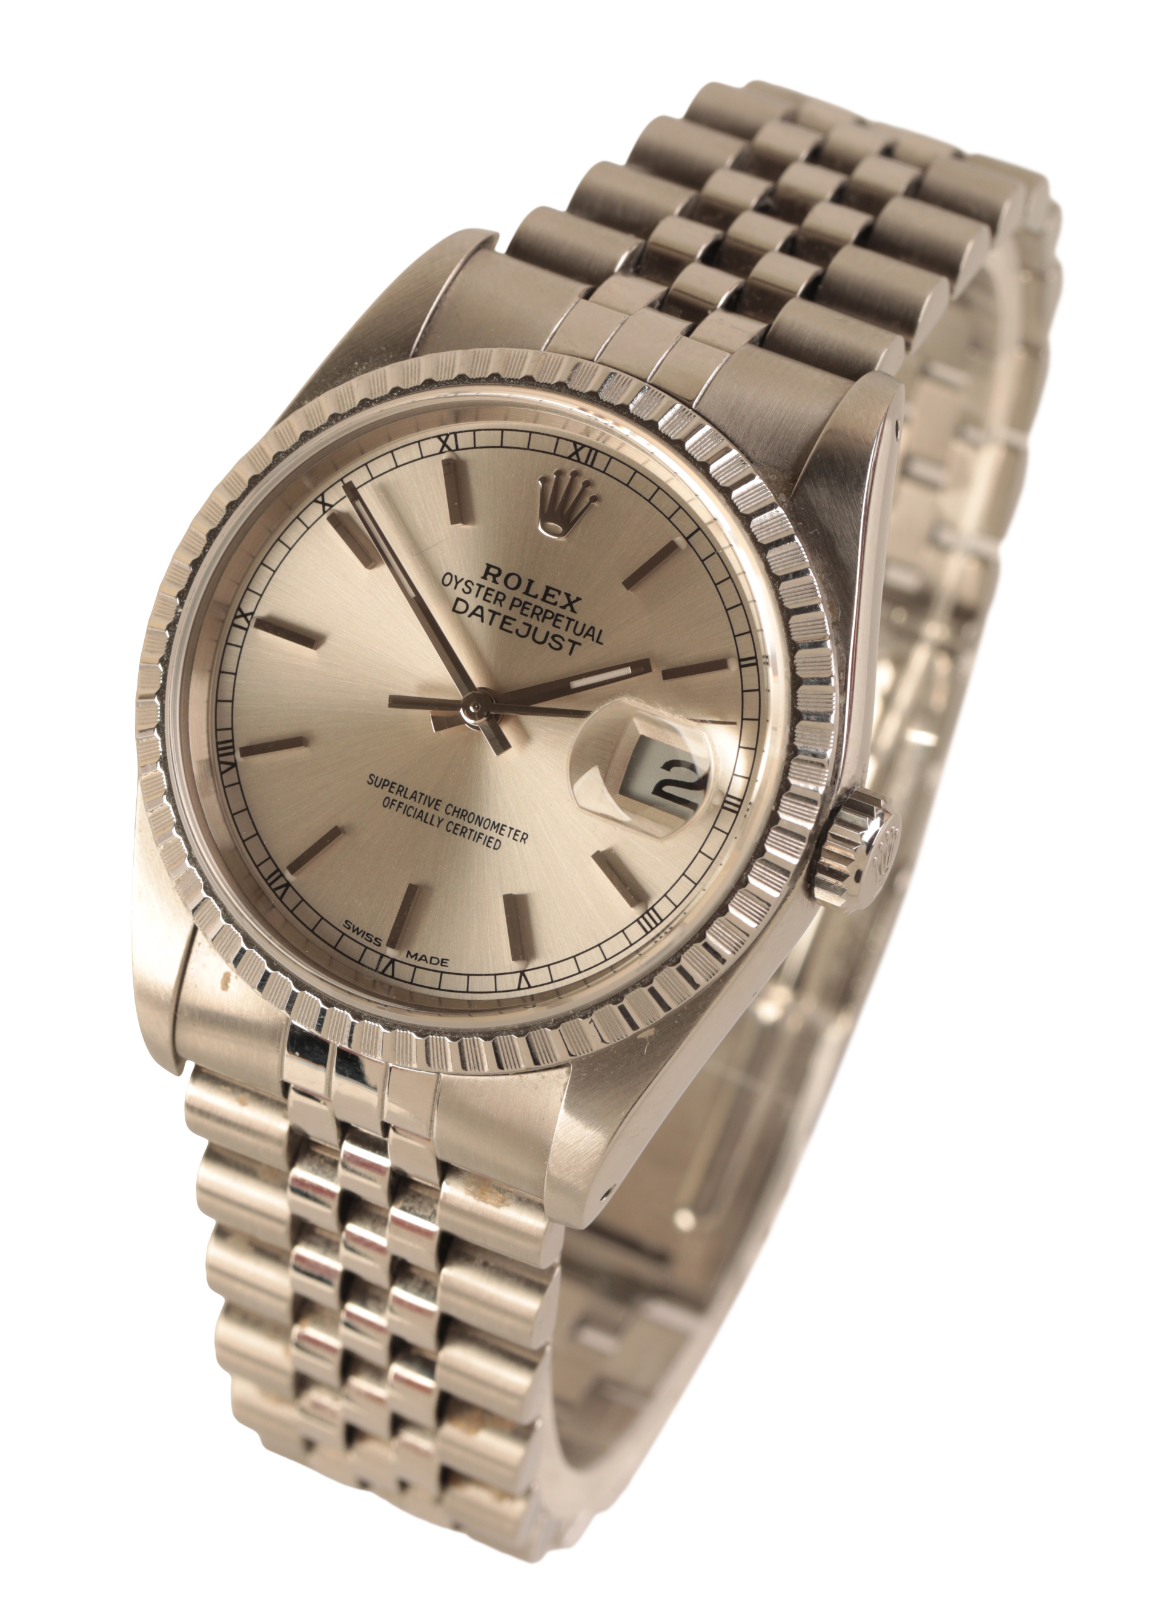 ROLEX OYSTER PERPETUAL DATEJUST  309f0c